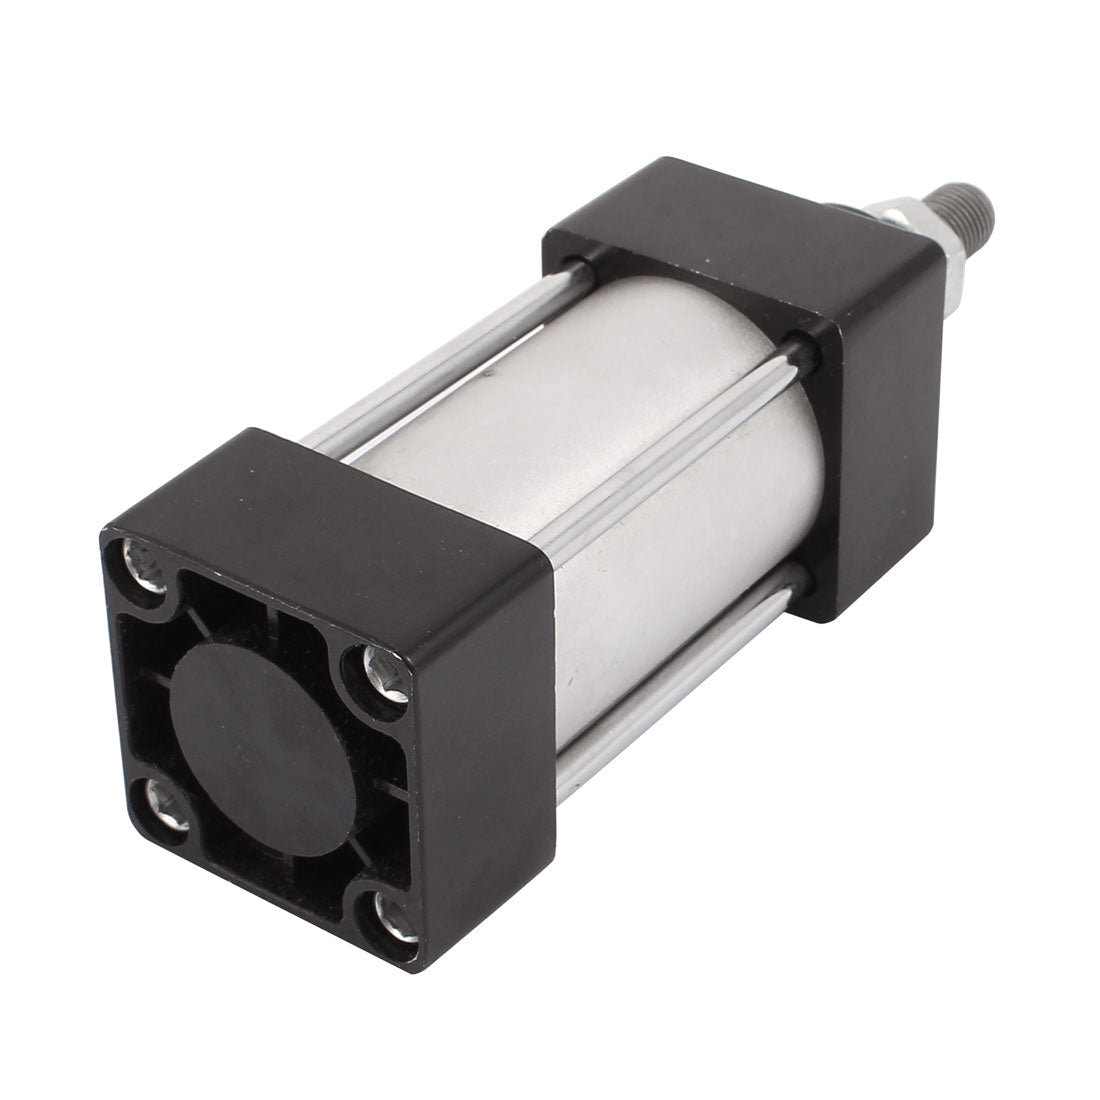 uxcell Uxcell SC40x25 Single Threaded Piston Rod Double Action Pneumatic Air Pressure Cylinder